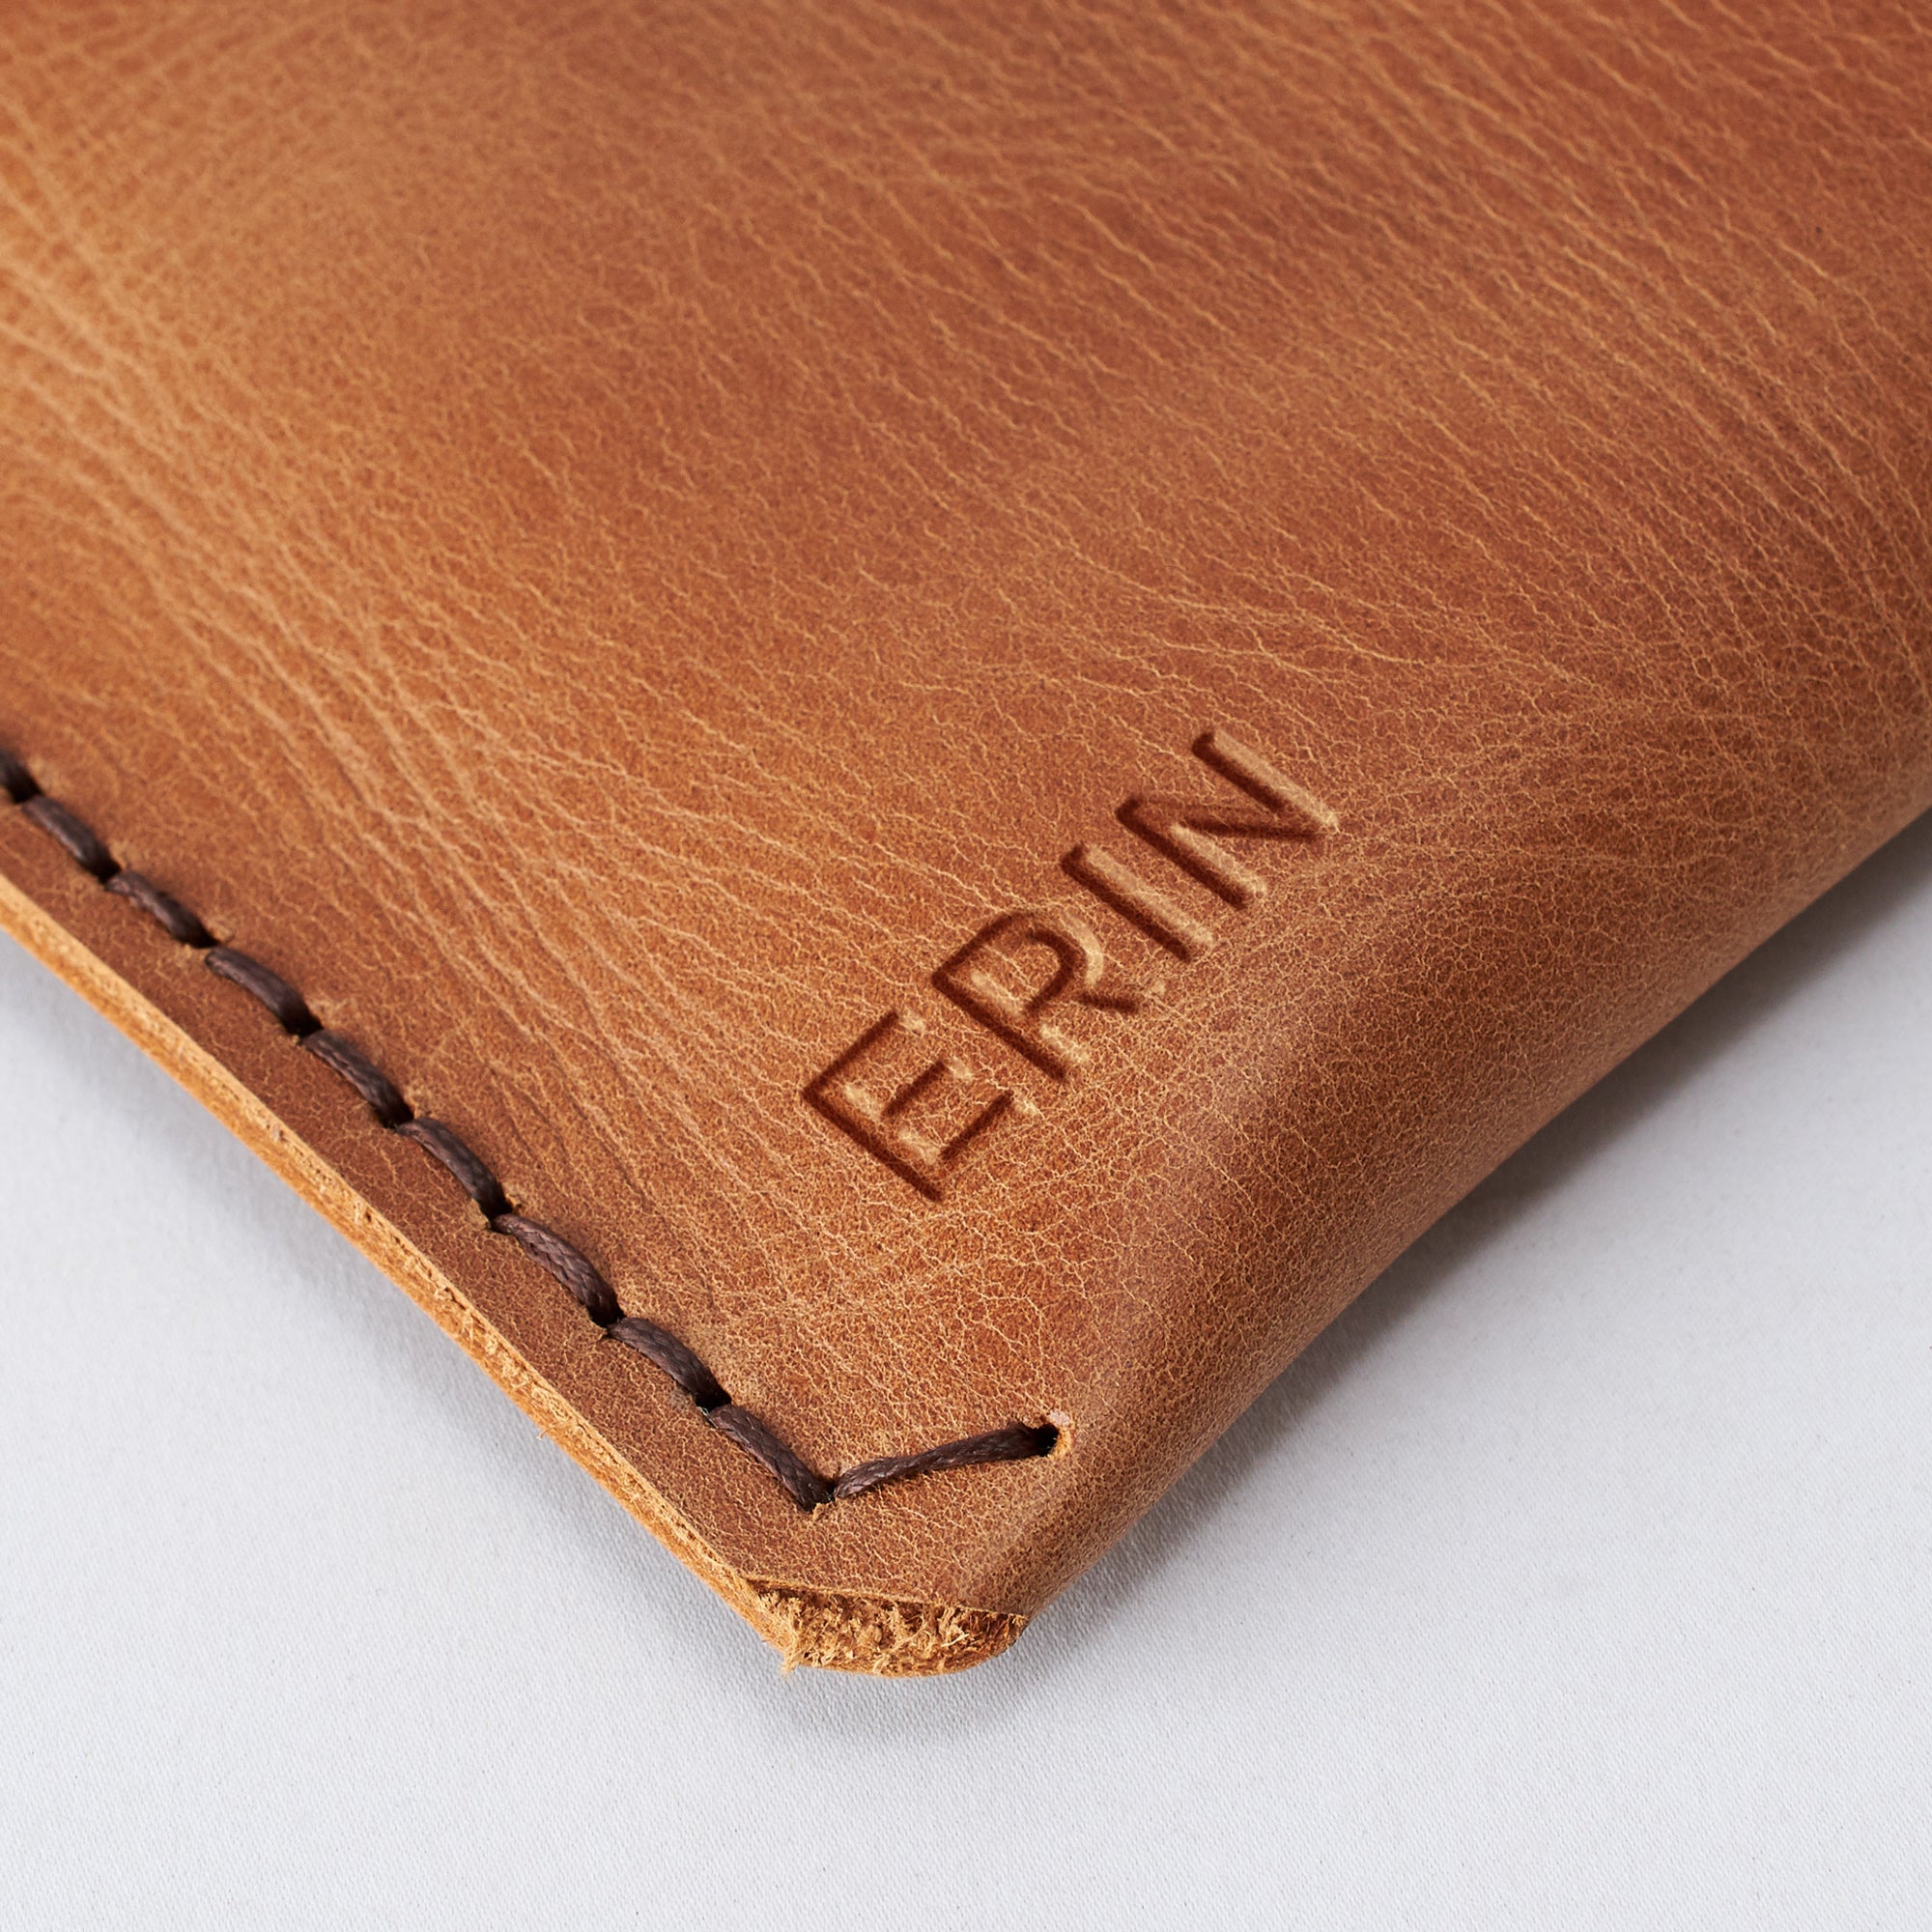 Initials engraving on our leather Lenovo Yoga Thinkpad light brown sleeve